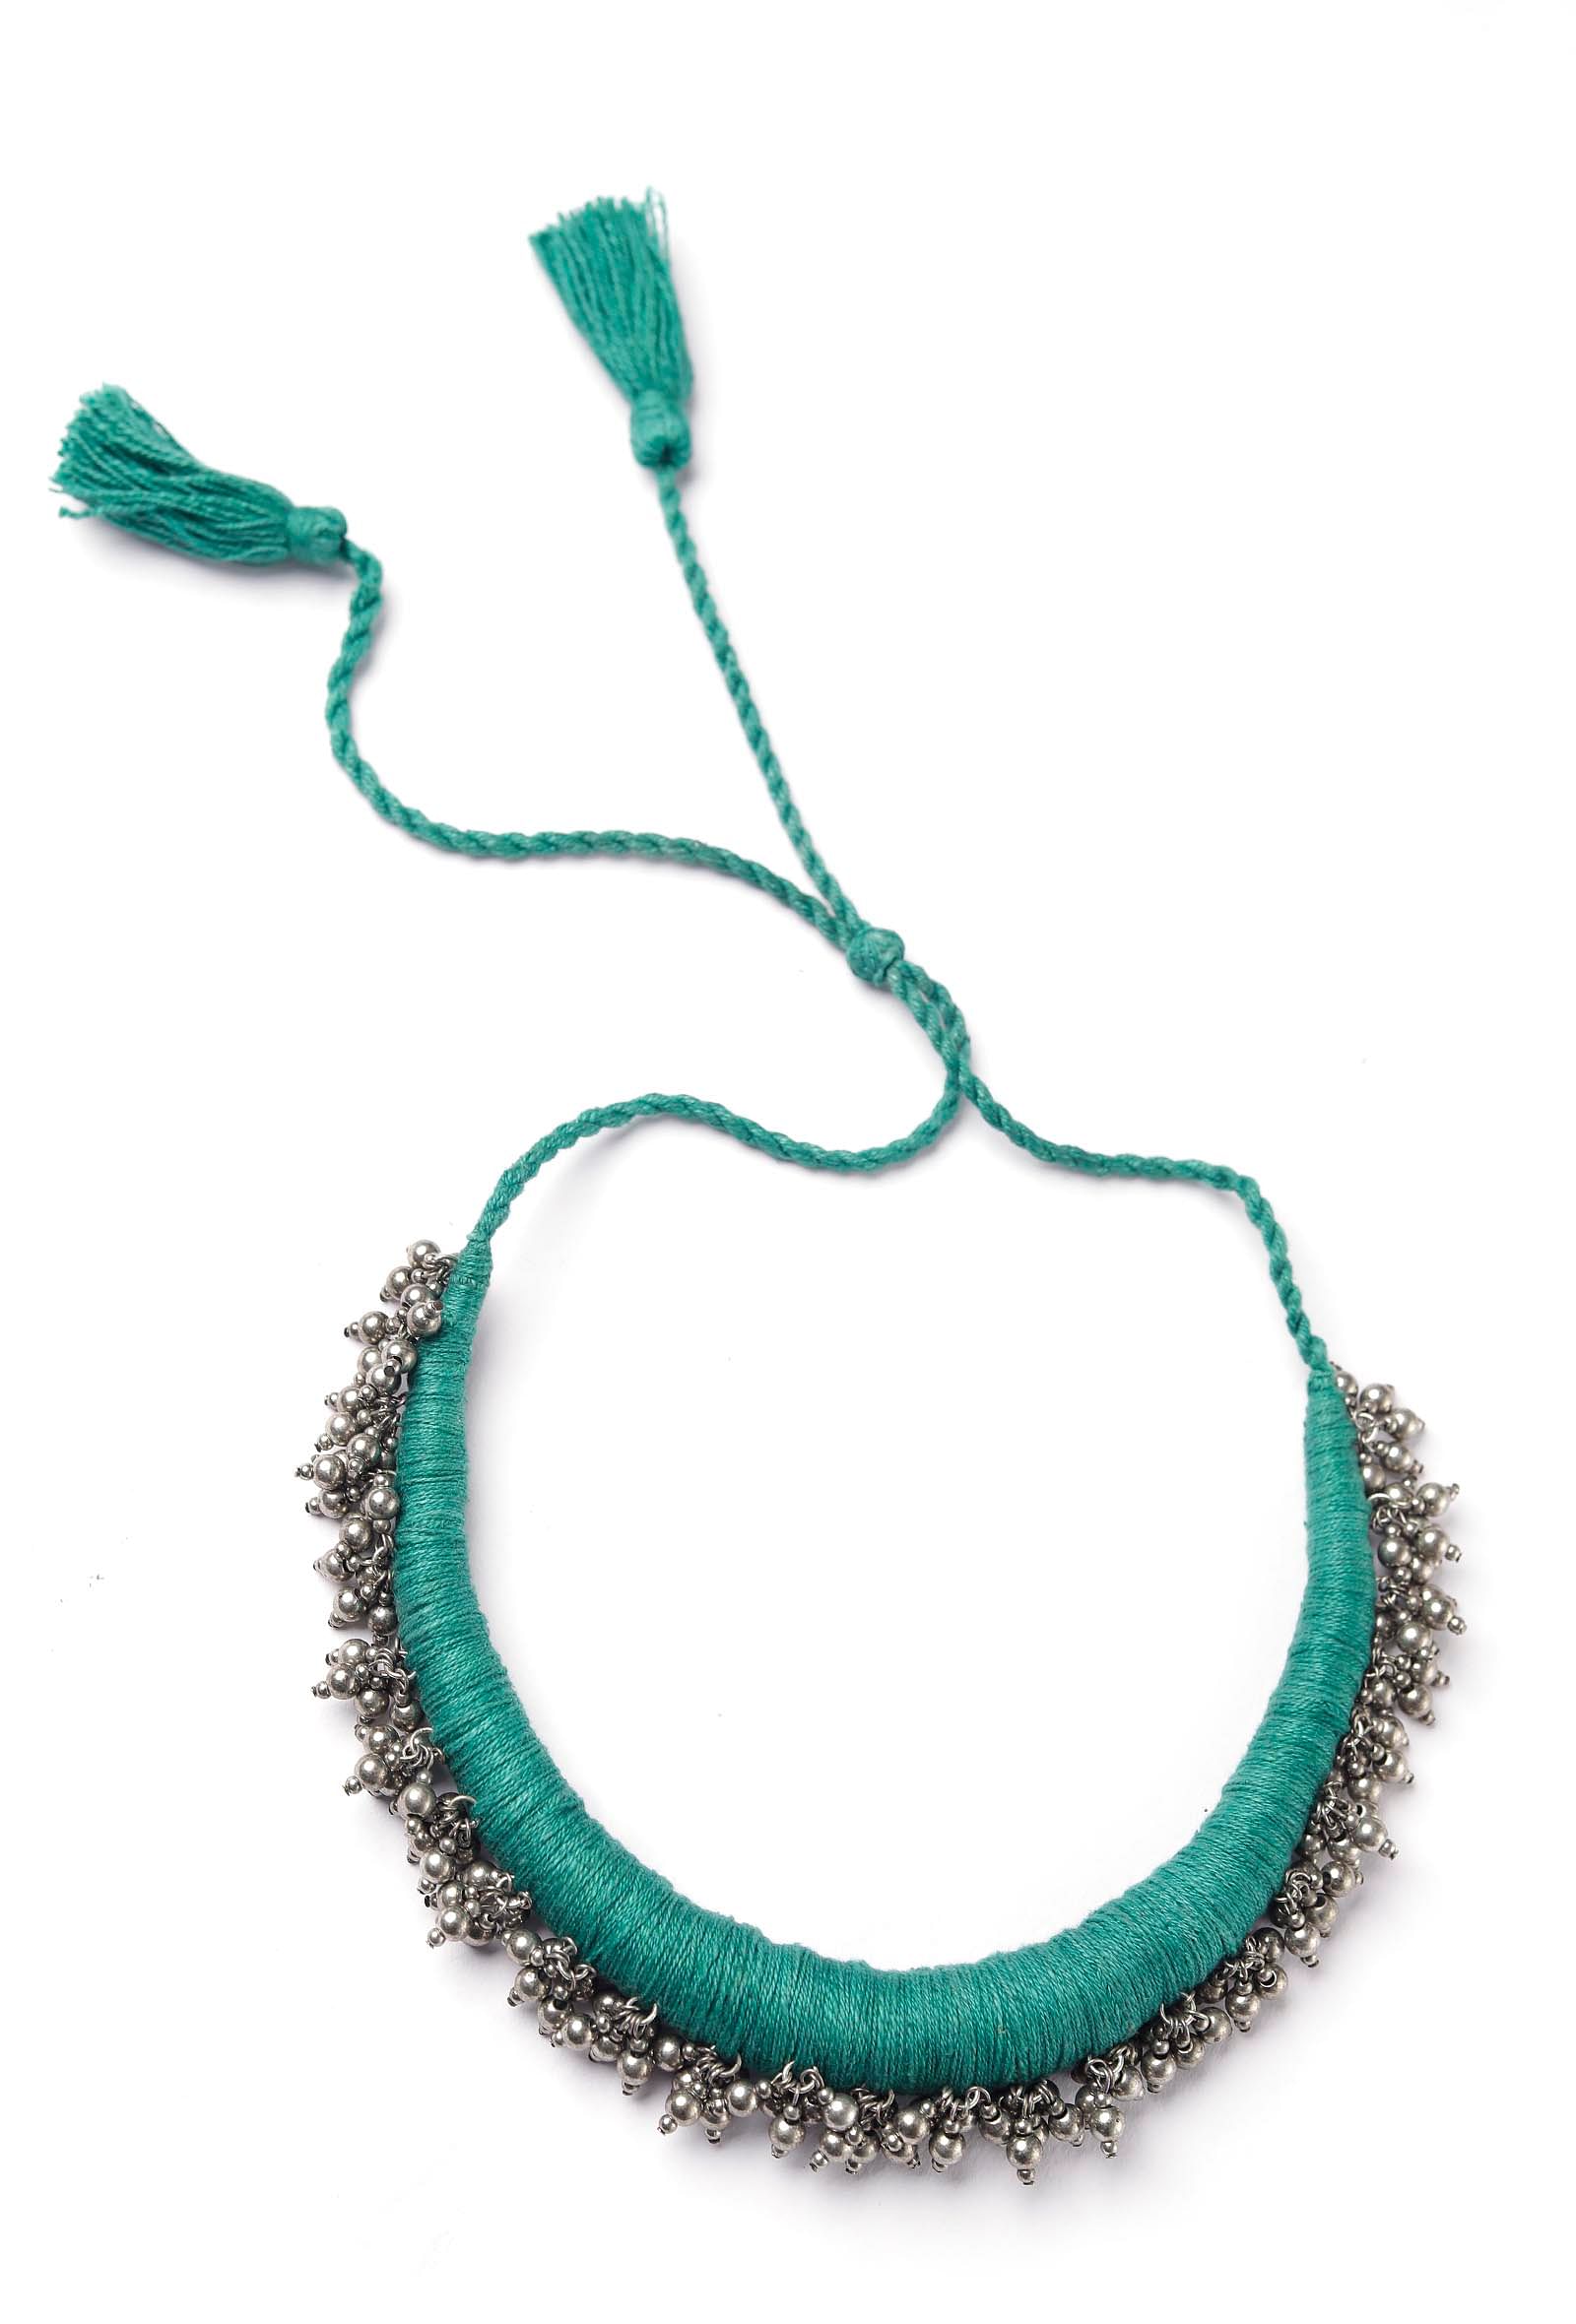 Kasheen Teal Green Tribal Ghungroo Necklace